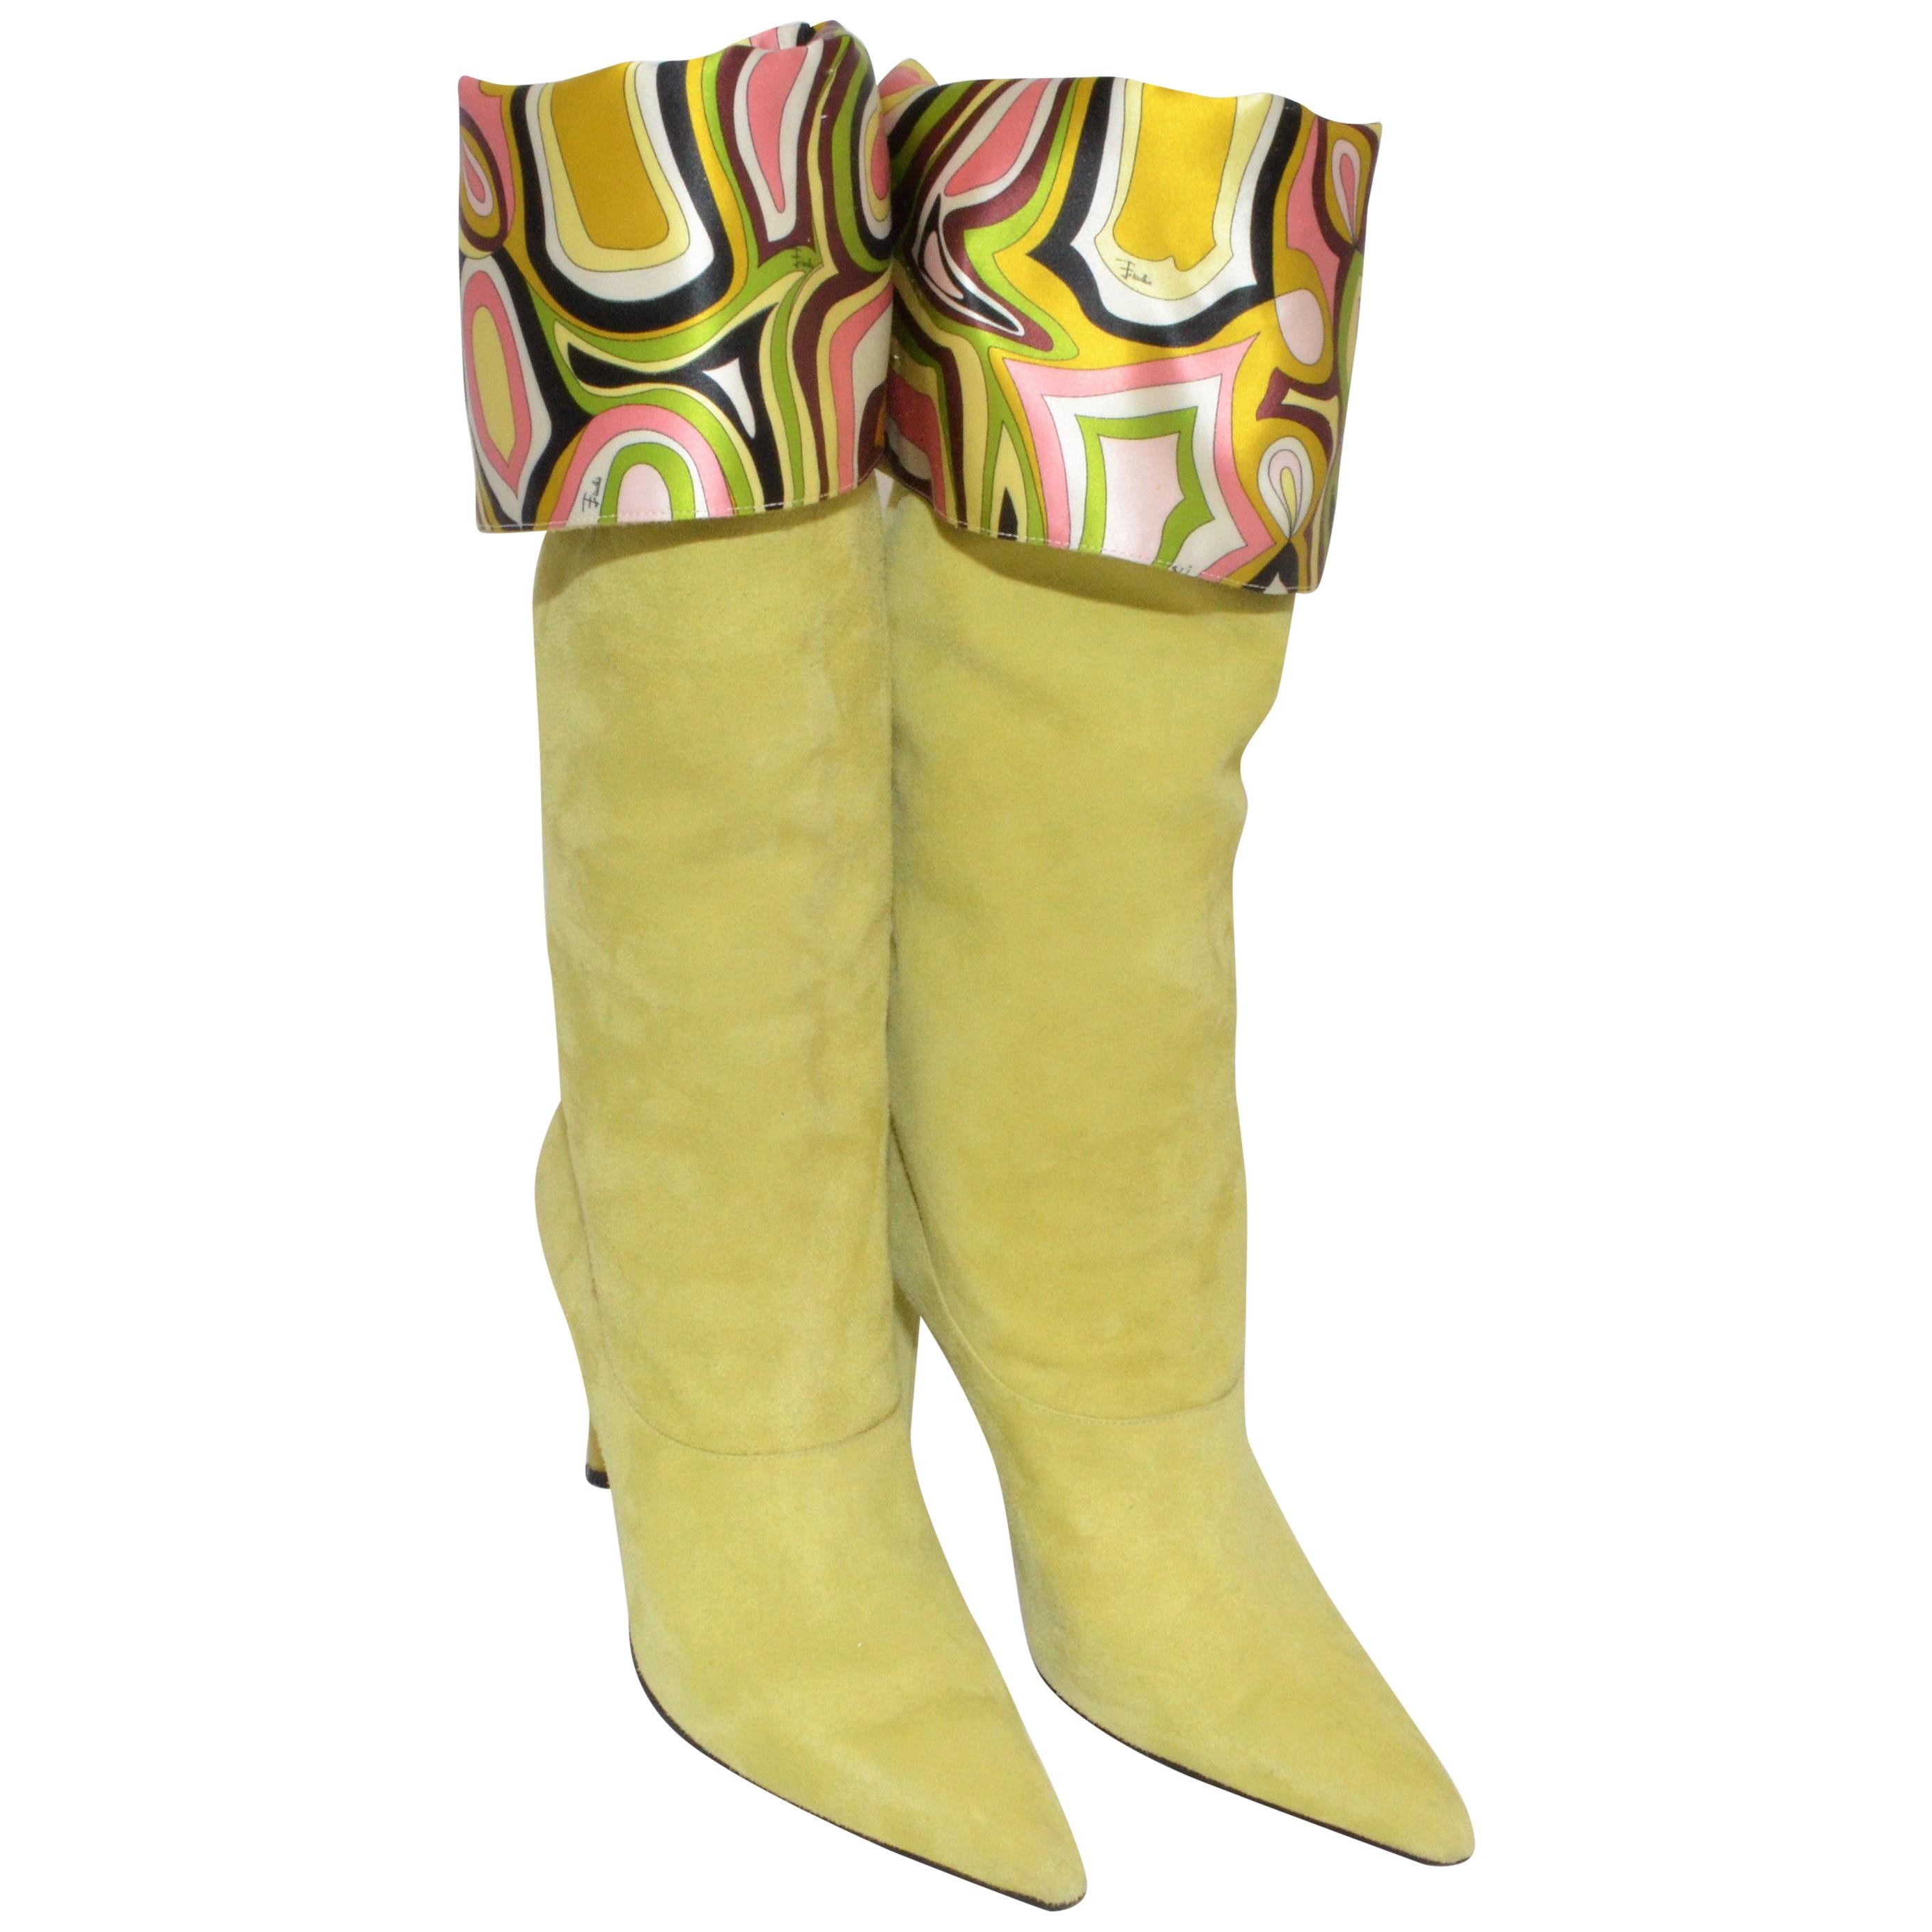 Emilio Pucci Green Suede Boots with 